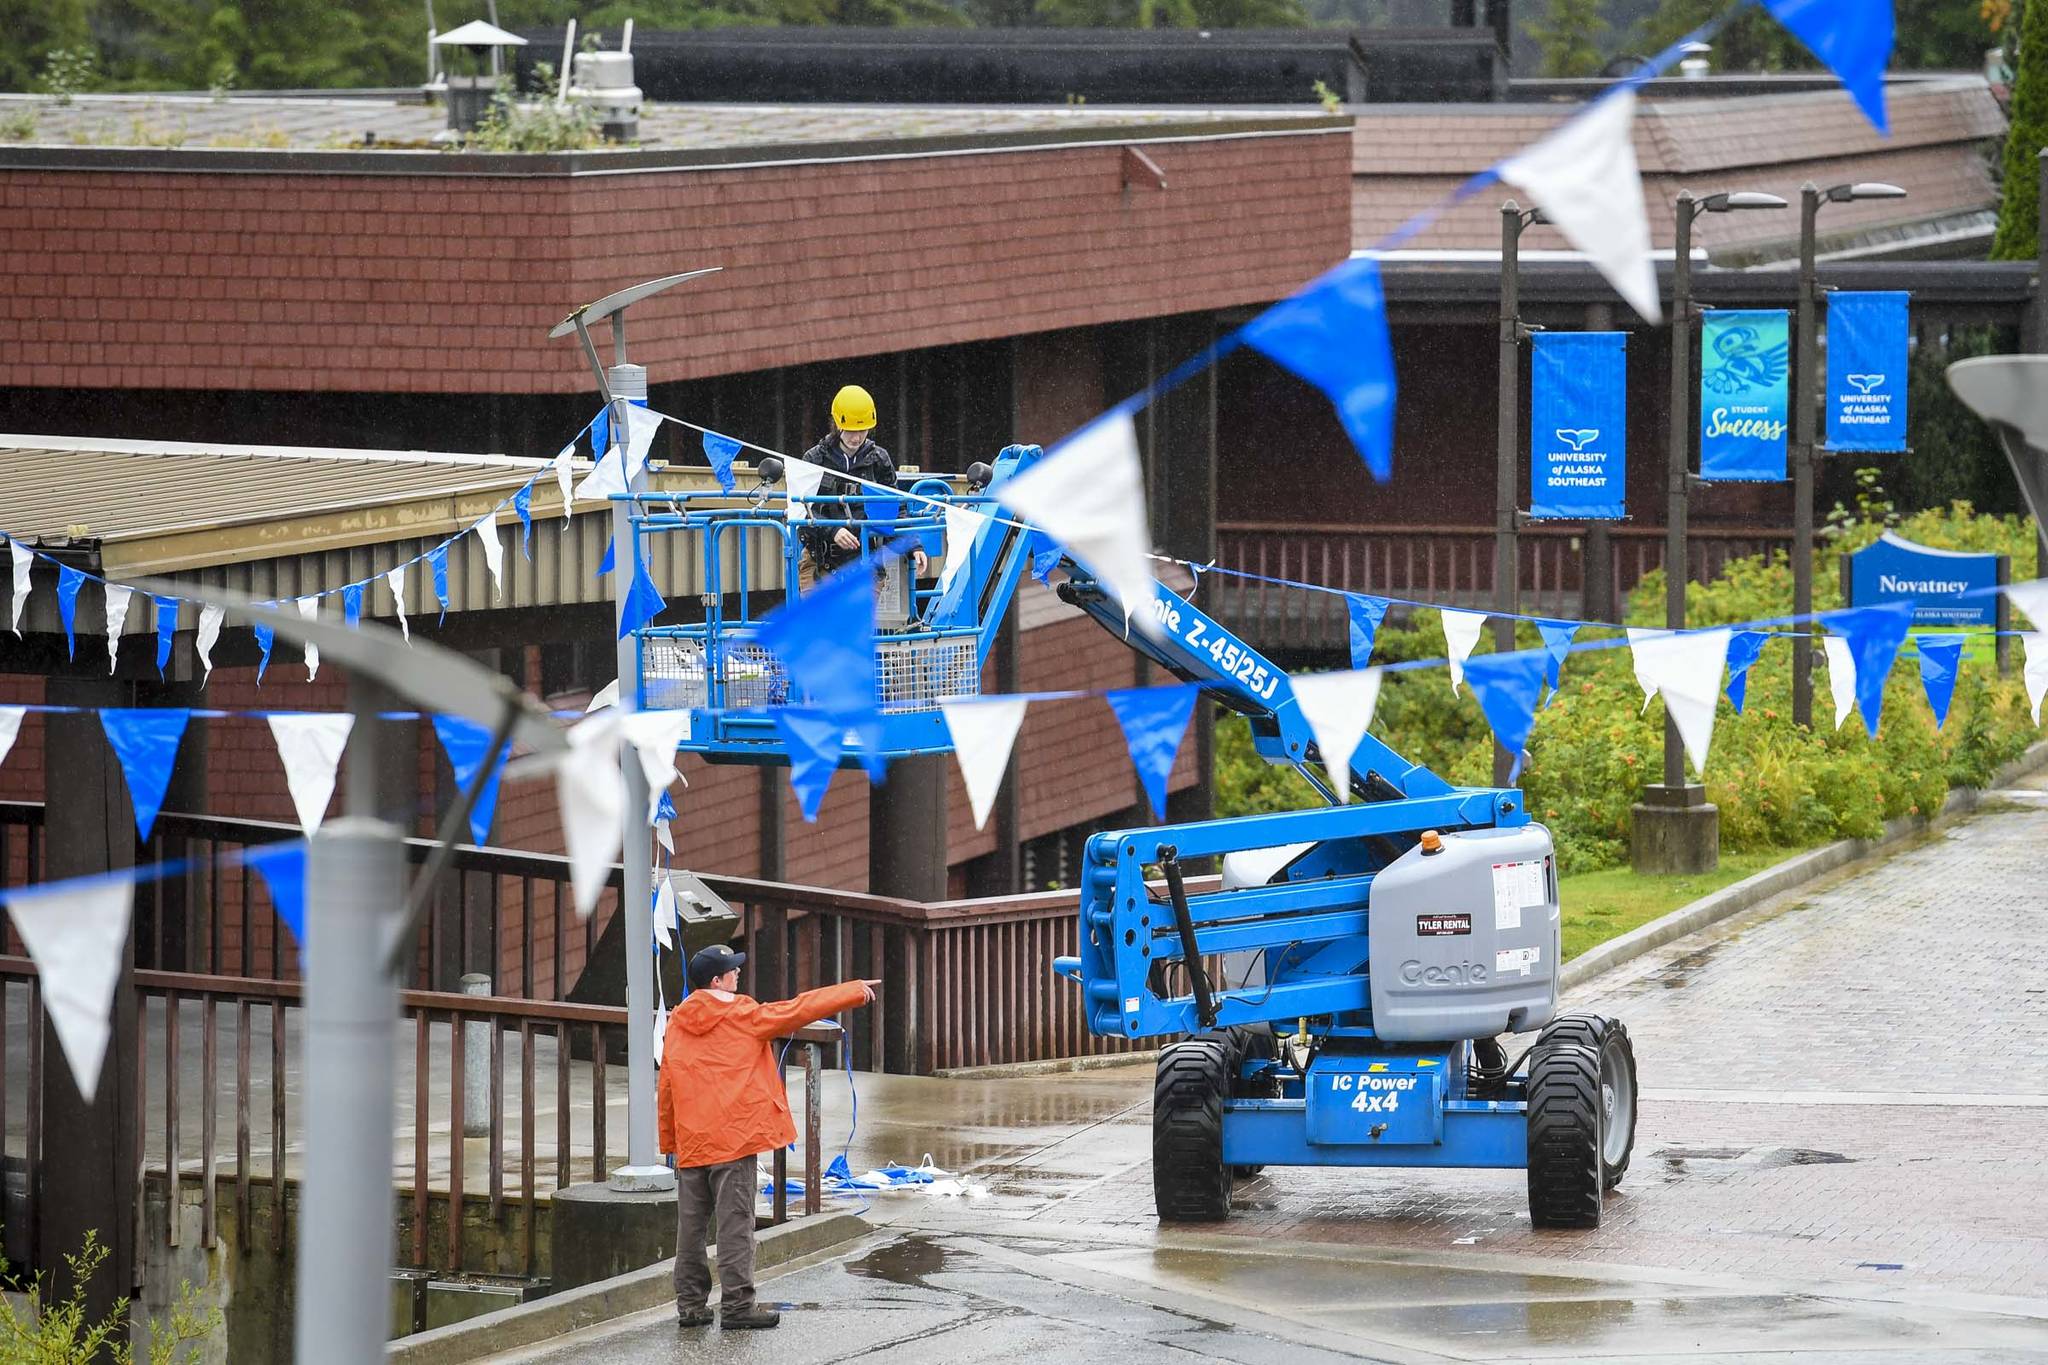 A crew hangs flags in the courtyard at the University of Alaska Southeast on Friday, Aug. 23, 2019. Classes start Monday, Aug. 26. (Michael Penn | Juneau Empire)